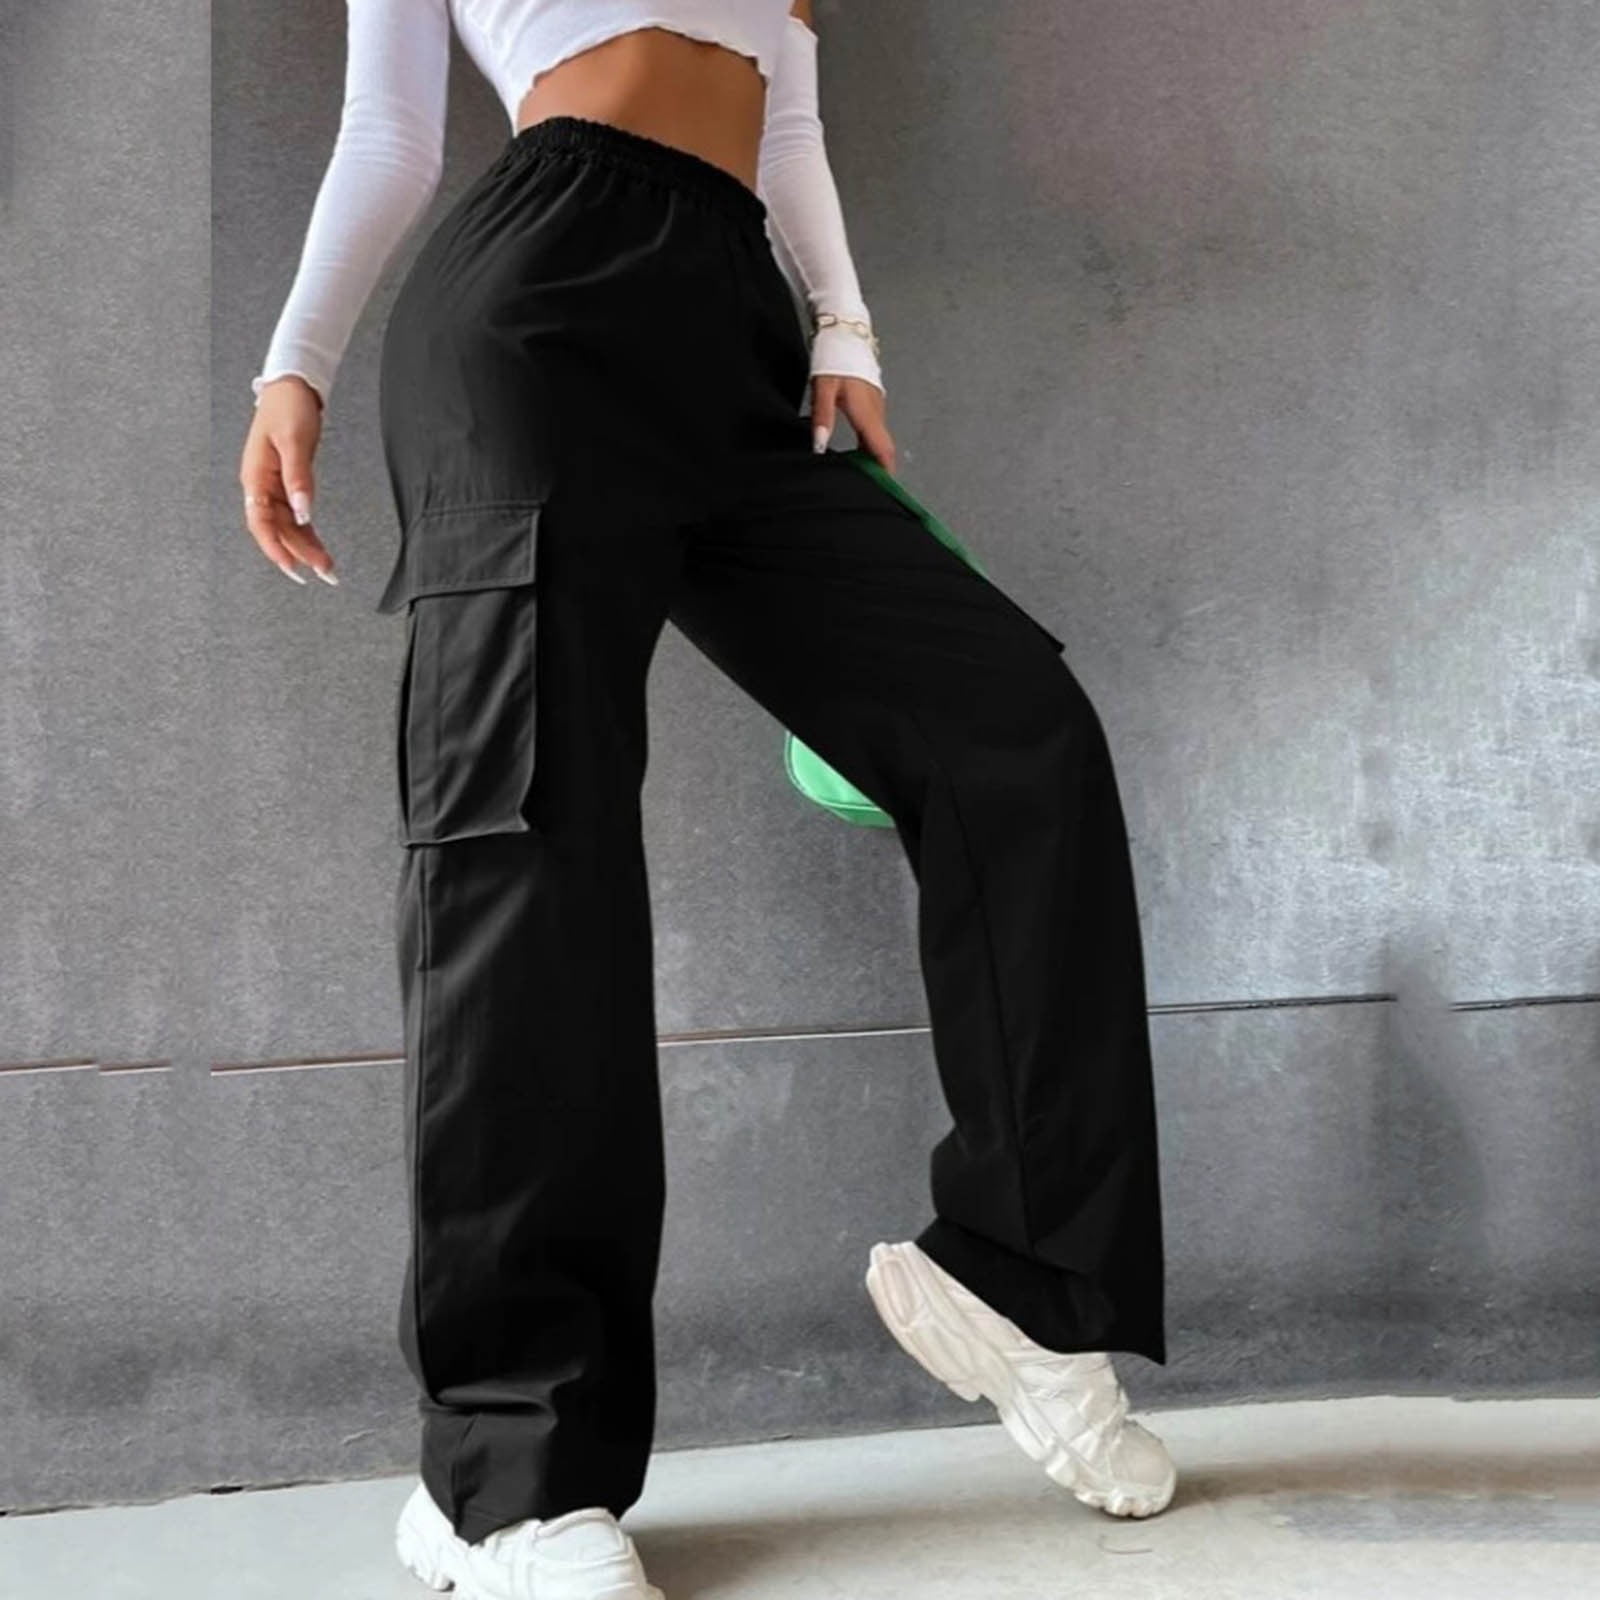 MUUNY Woman's Casual Full-Length Loose Pants Solid Stretchy High Waist Trousers  Wide Leg Pants Sweatpants with Pockets (Black,XS) at  Women's  Clothing store